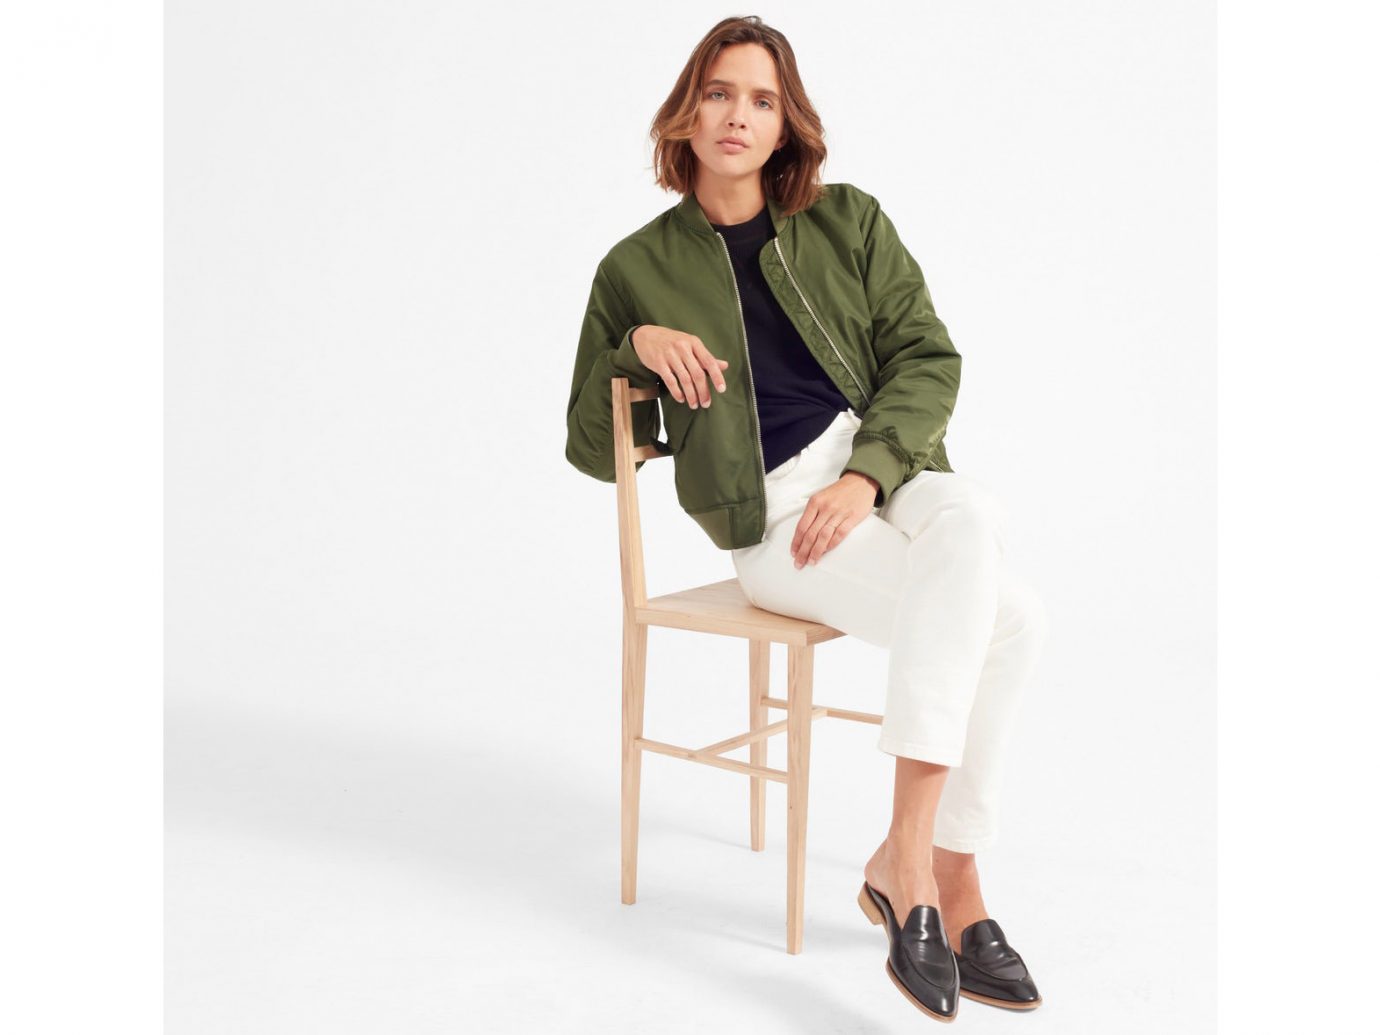 Packing Tips Spring Travel Style + Design Travel Shop person sitting standing shoulder furniture outerwear product design jacket sleeve neck coat posing